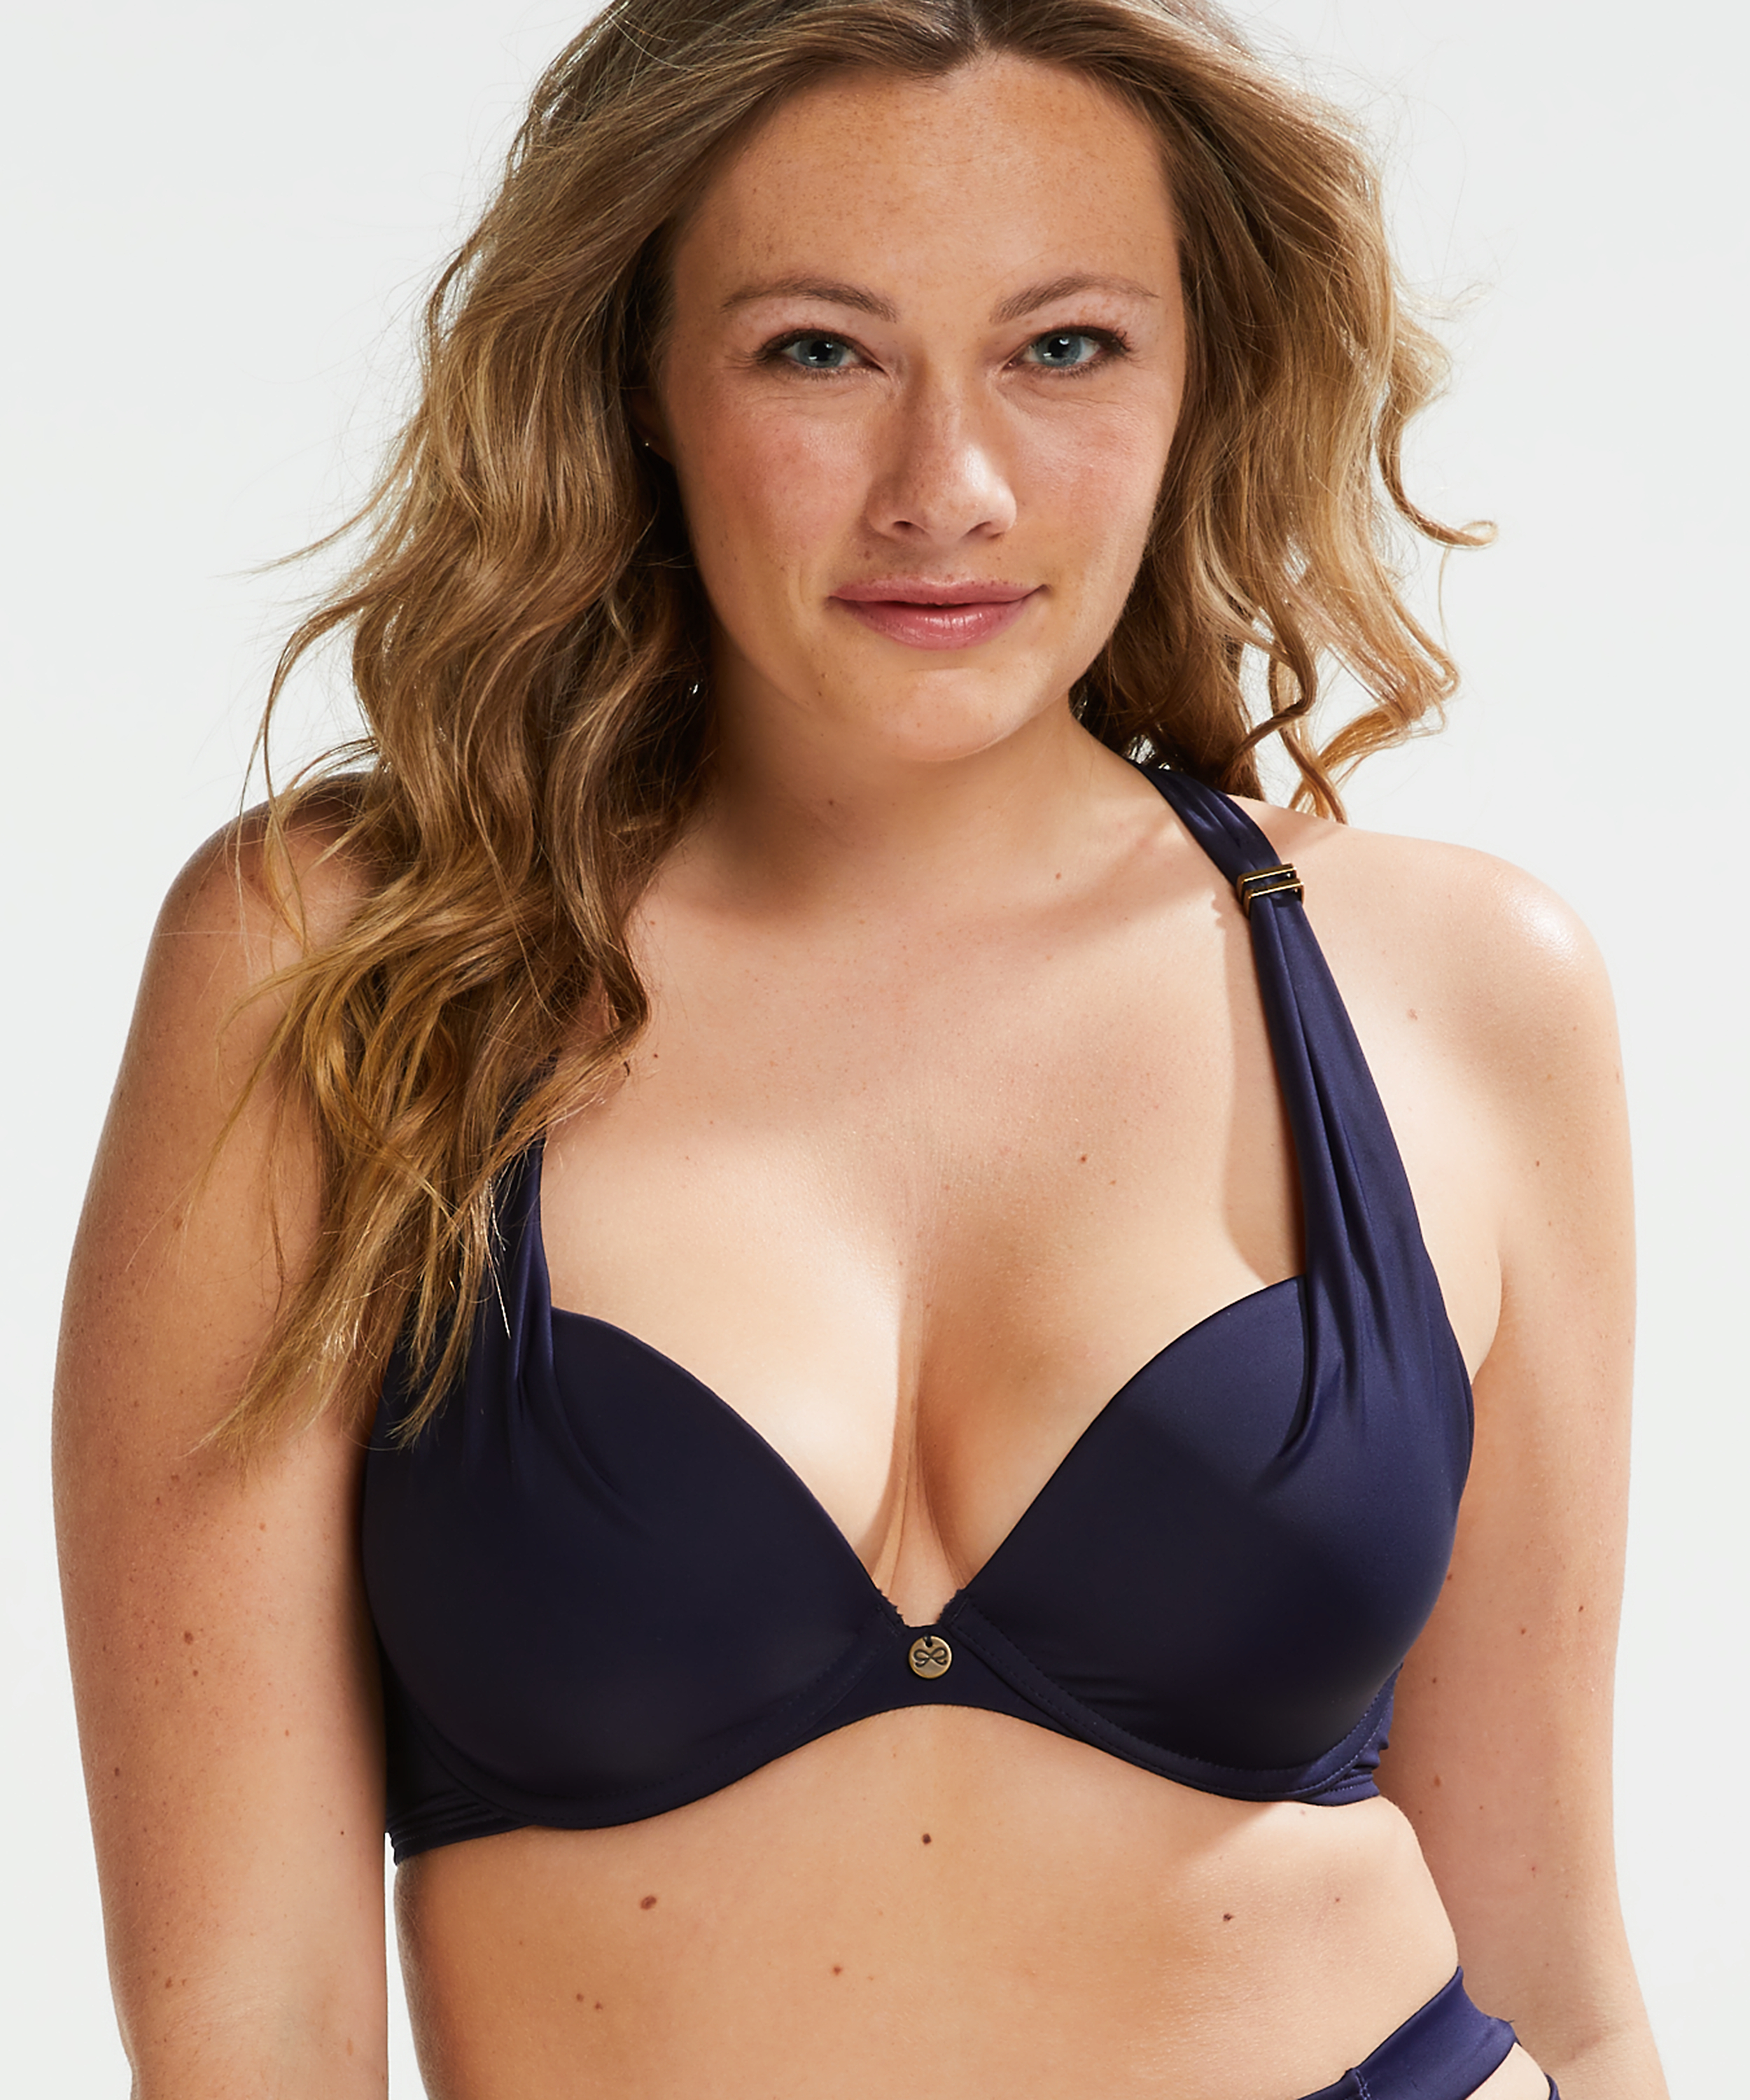 Sunset Dreams padded underwired bikini top Cup E + for €29.99